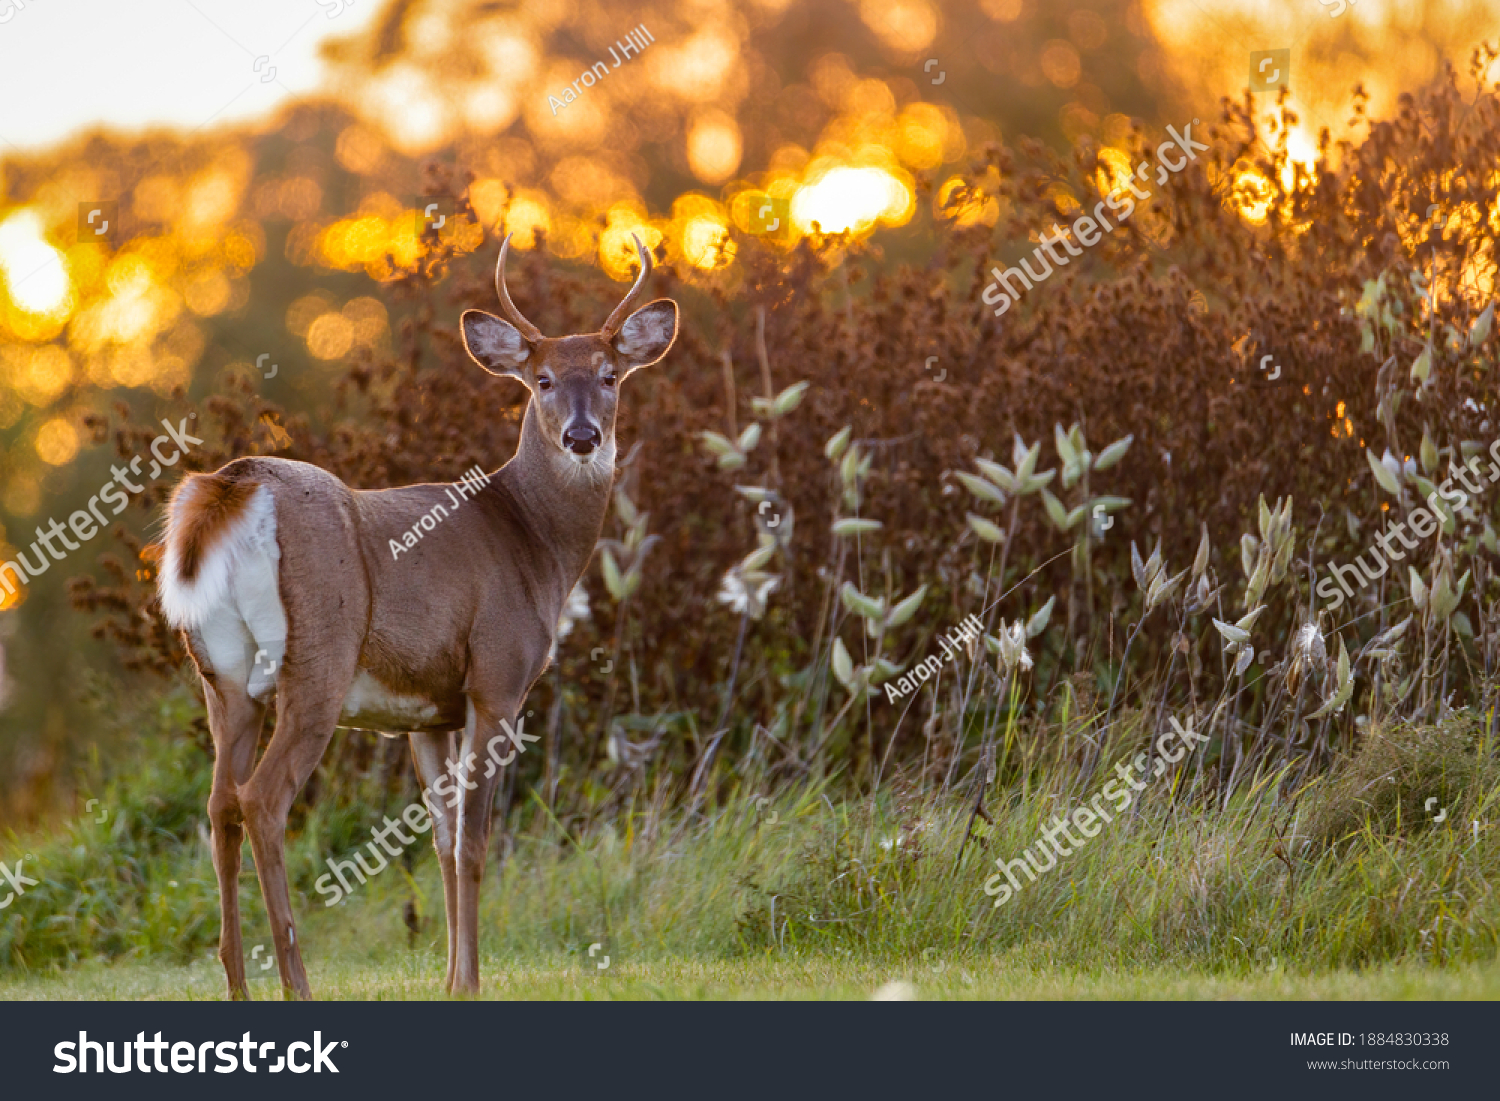 White-tailed Buck (Odocoileus virginianus) backlit from the setting sun at evening. Selective focus, background blur and foreground blur.
 #1884830338